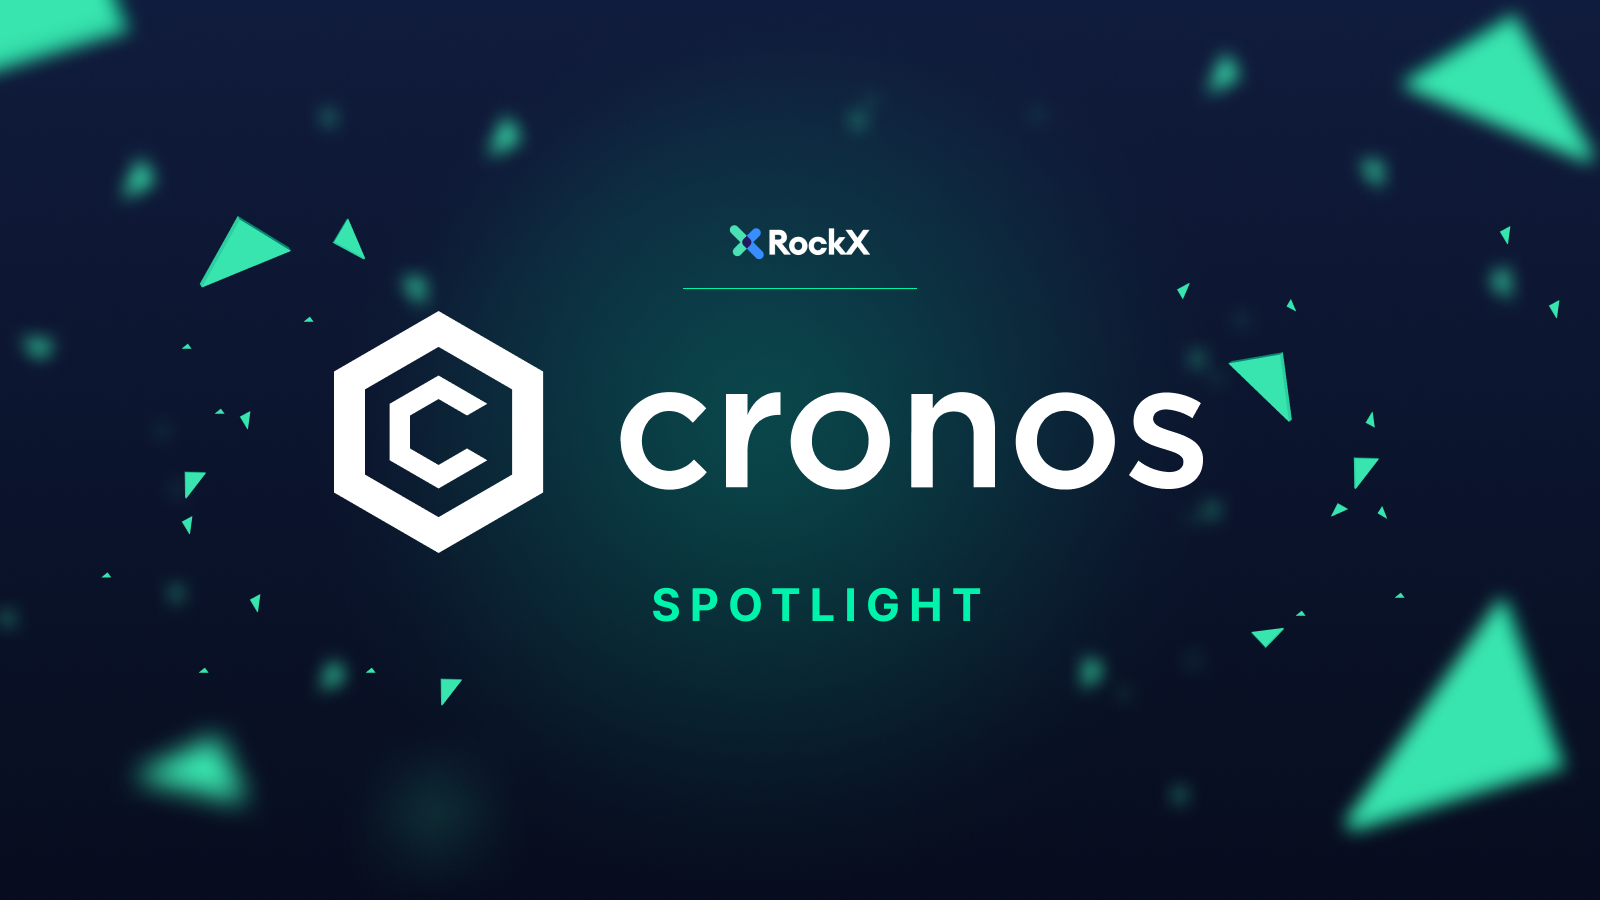 A dark green background with lighter green triangle elements surrounding the Cronos logo with the word "spotlight" beneath it. Above the Cronos logo is the RockX logo.